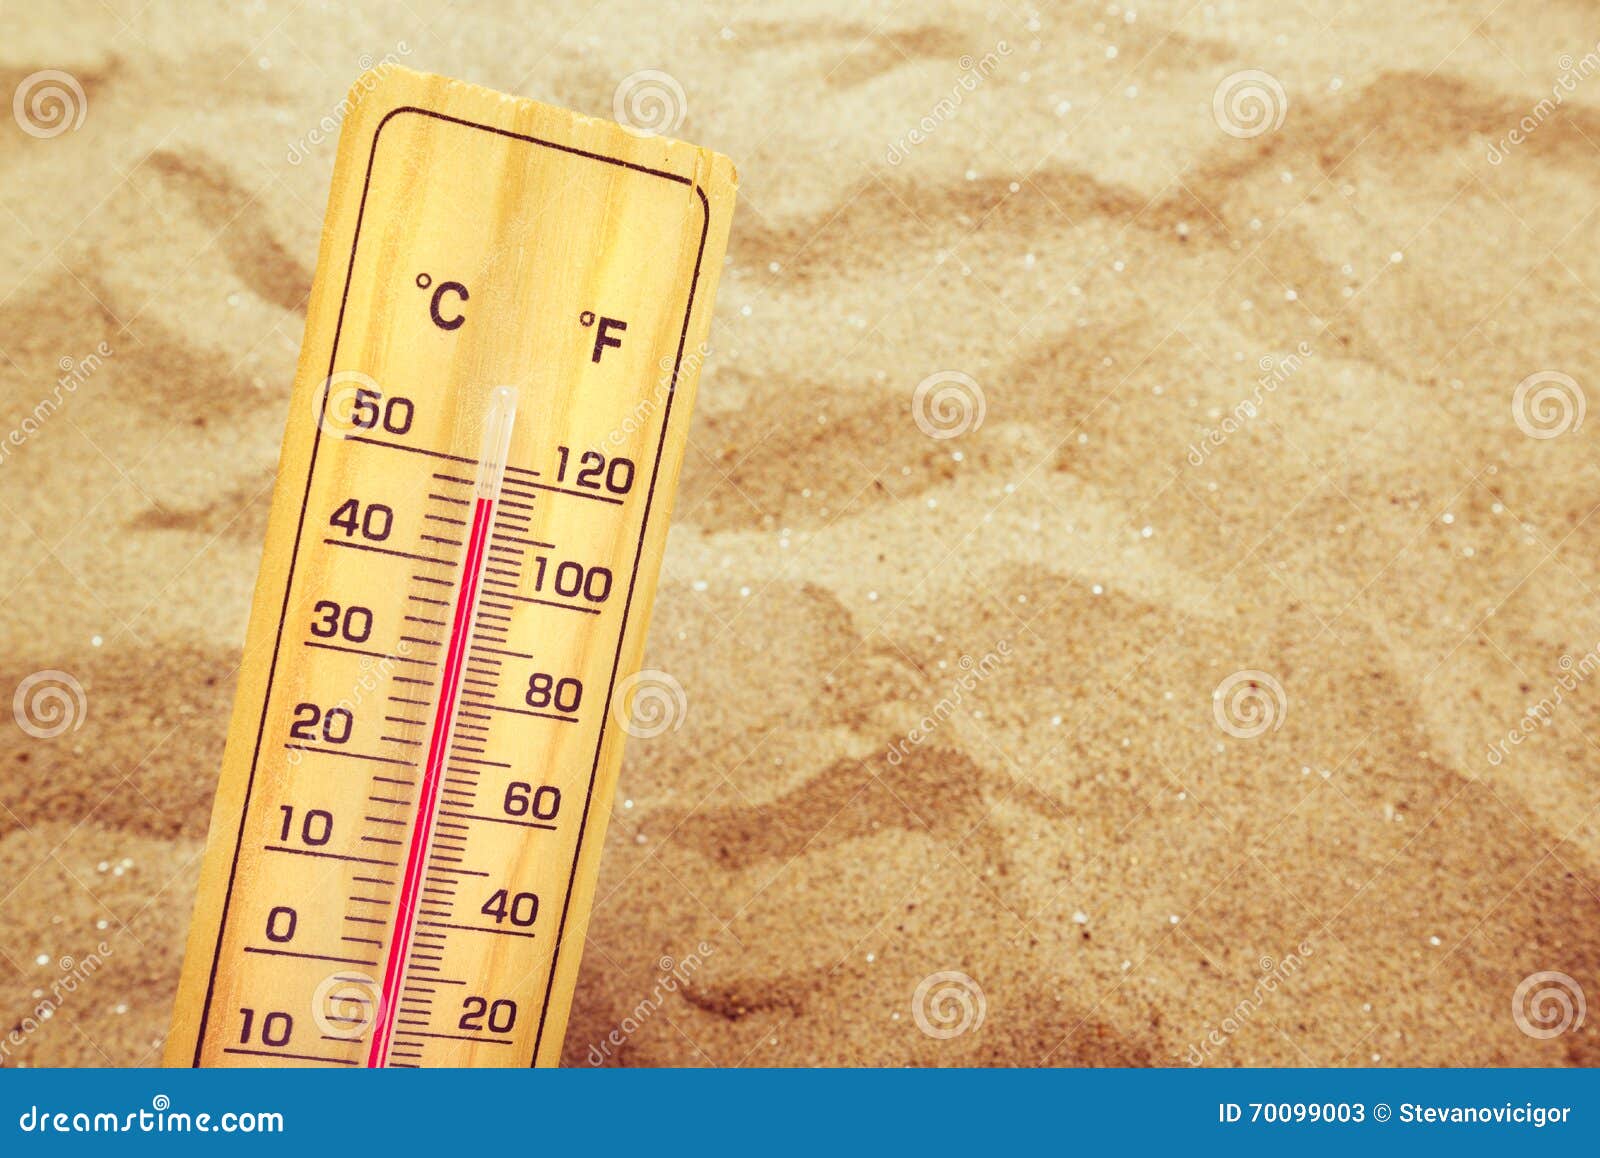 extremely high temperatures, thermometer on warm desert sand